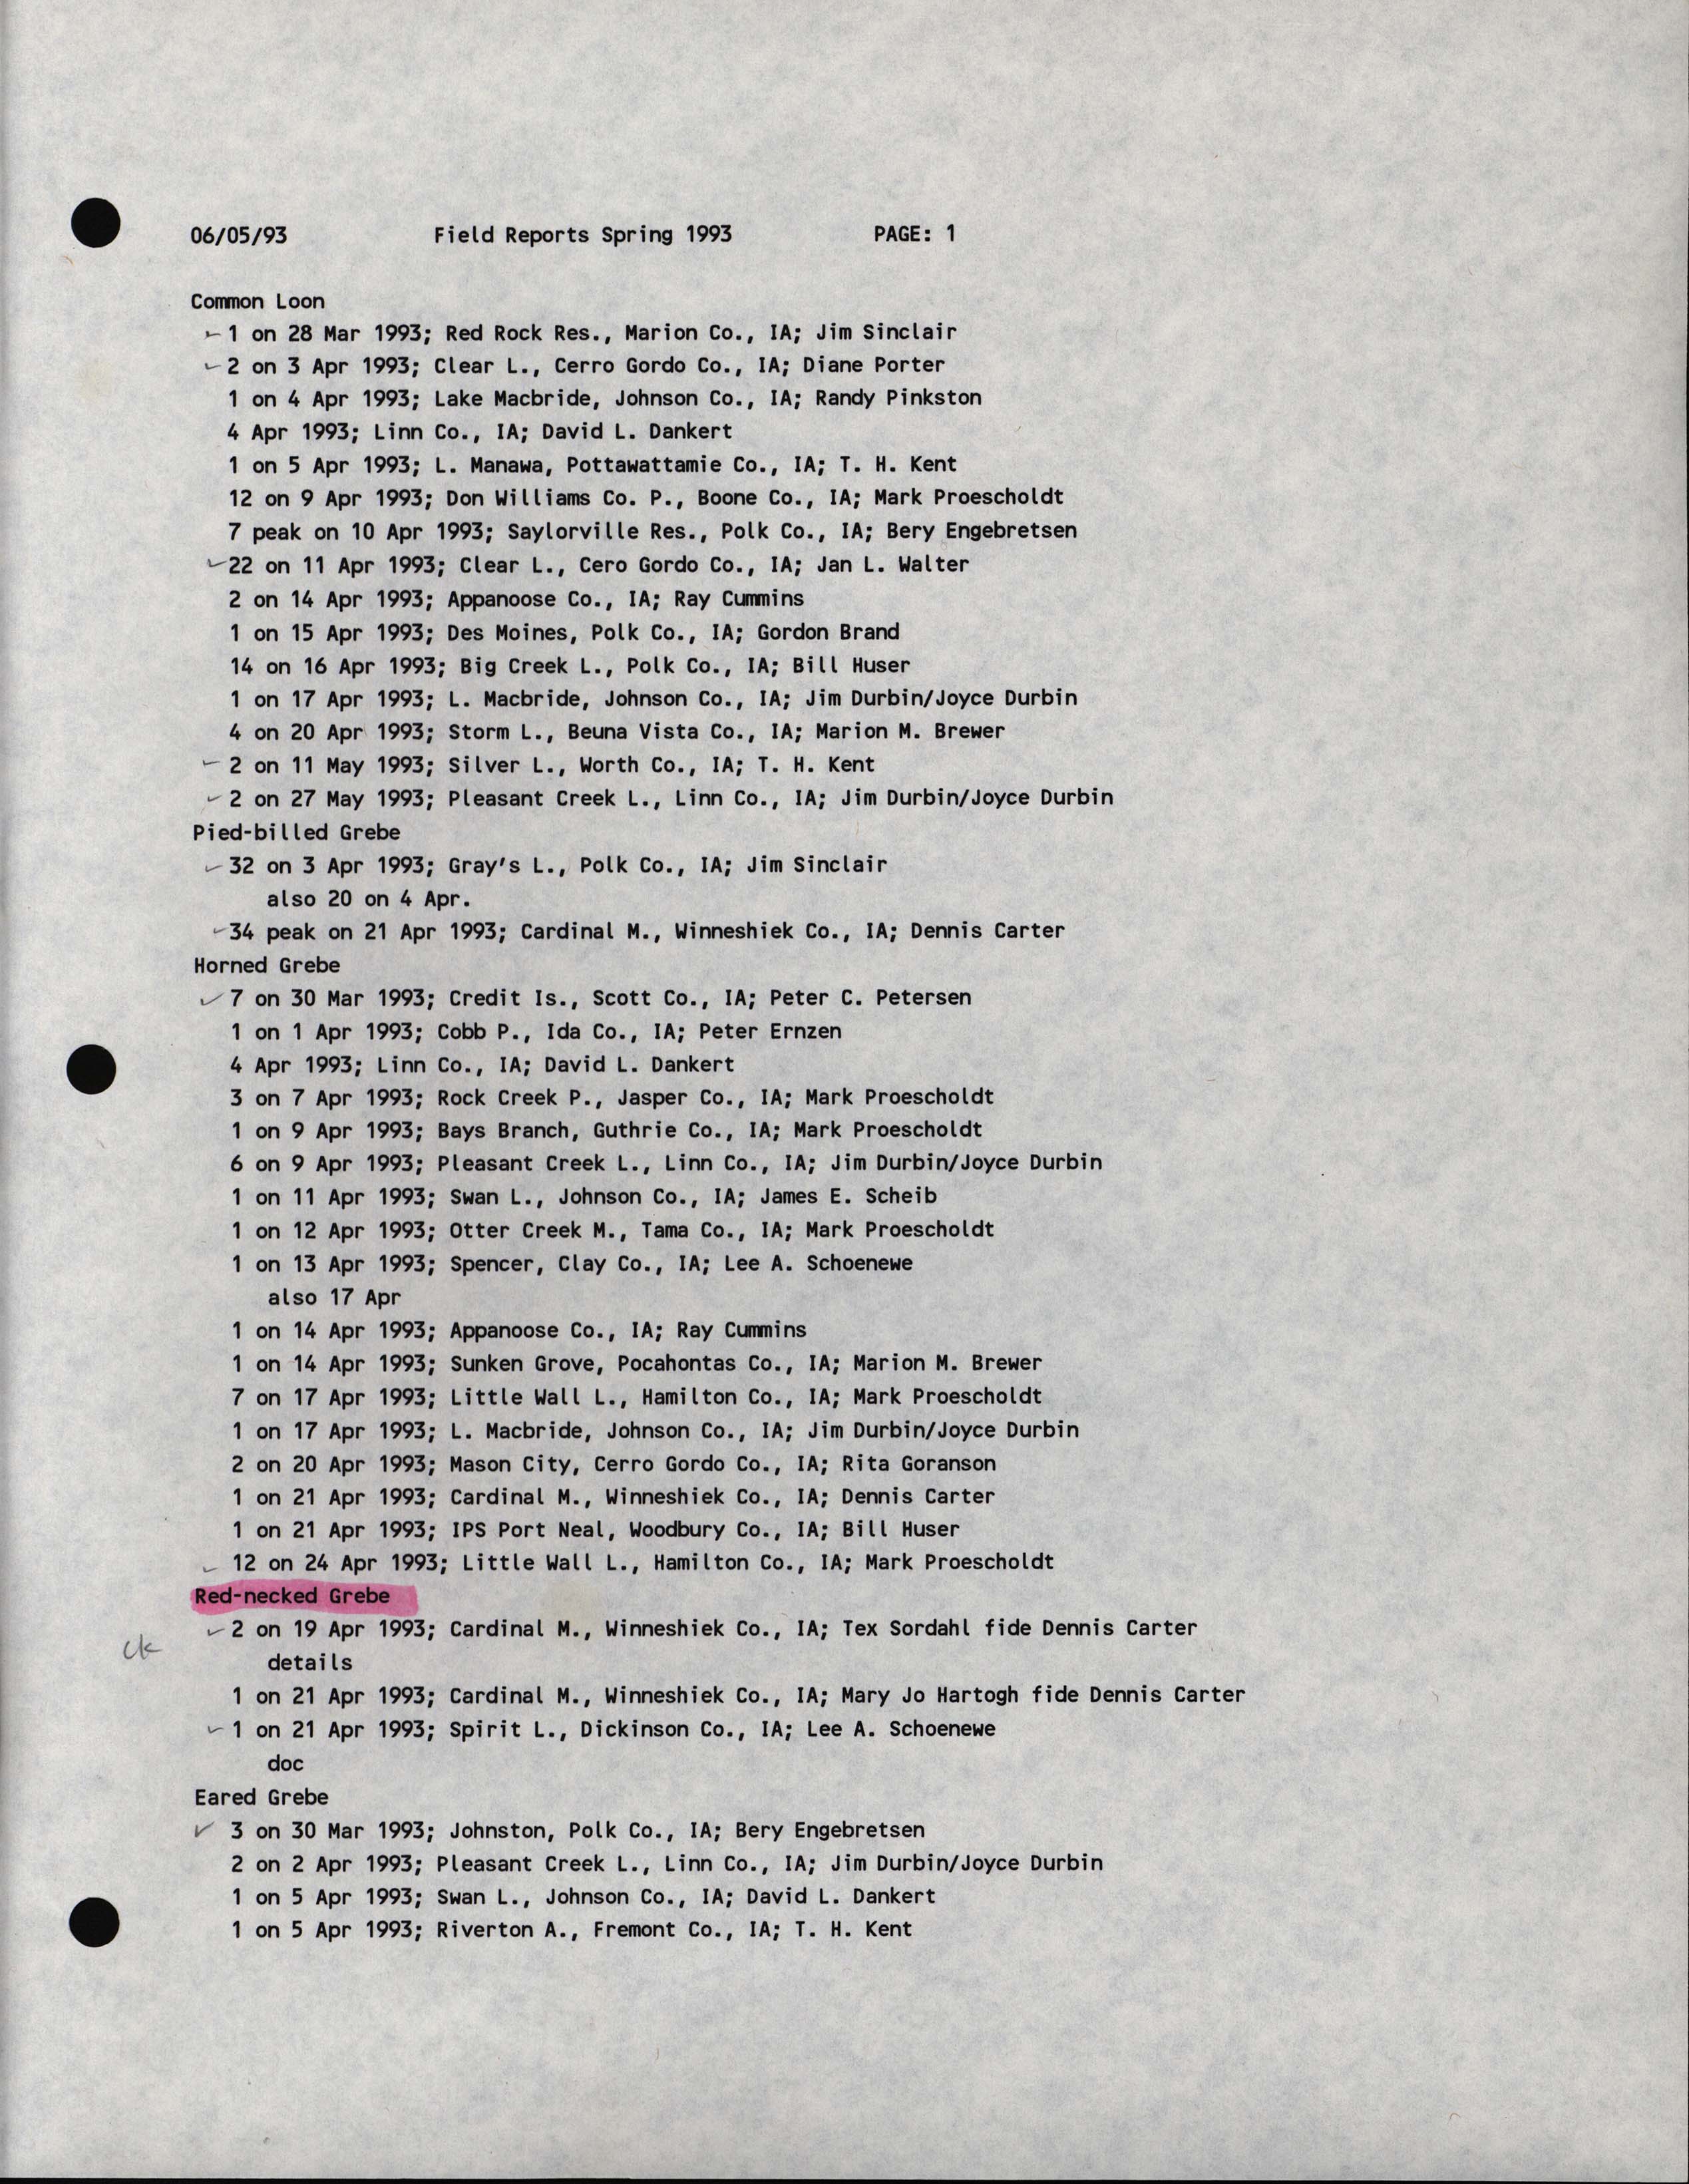 Field reports, Spring 1993